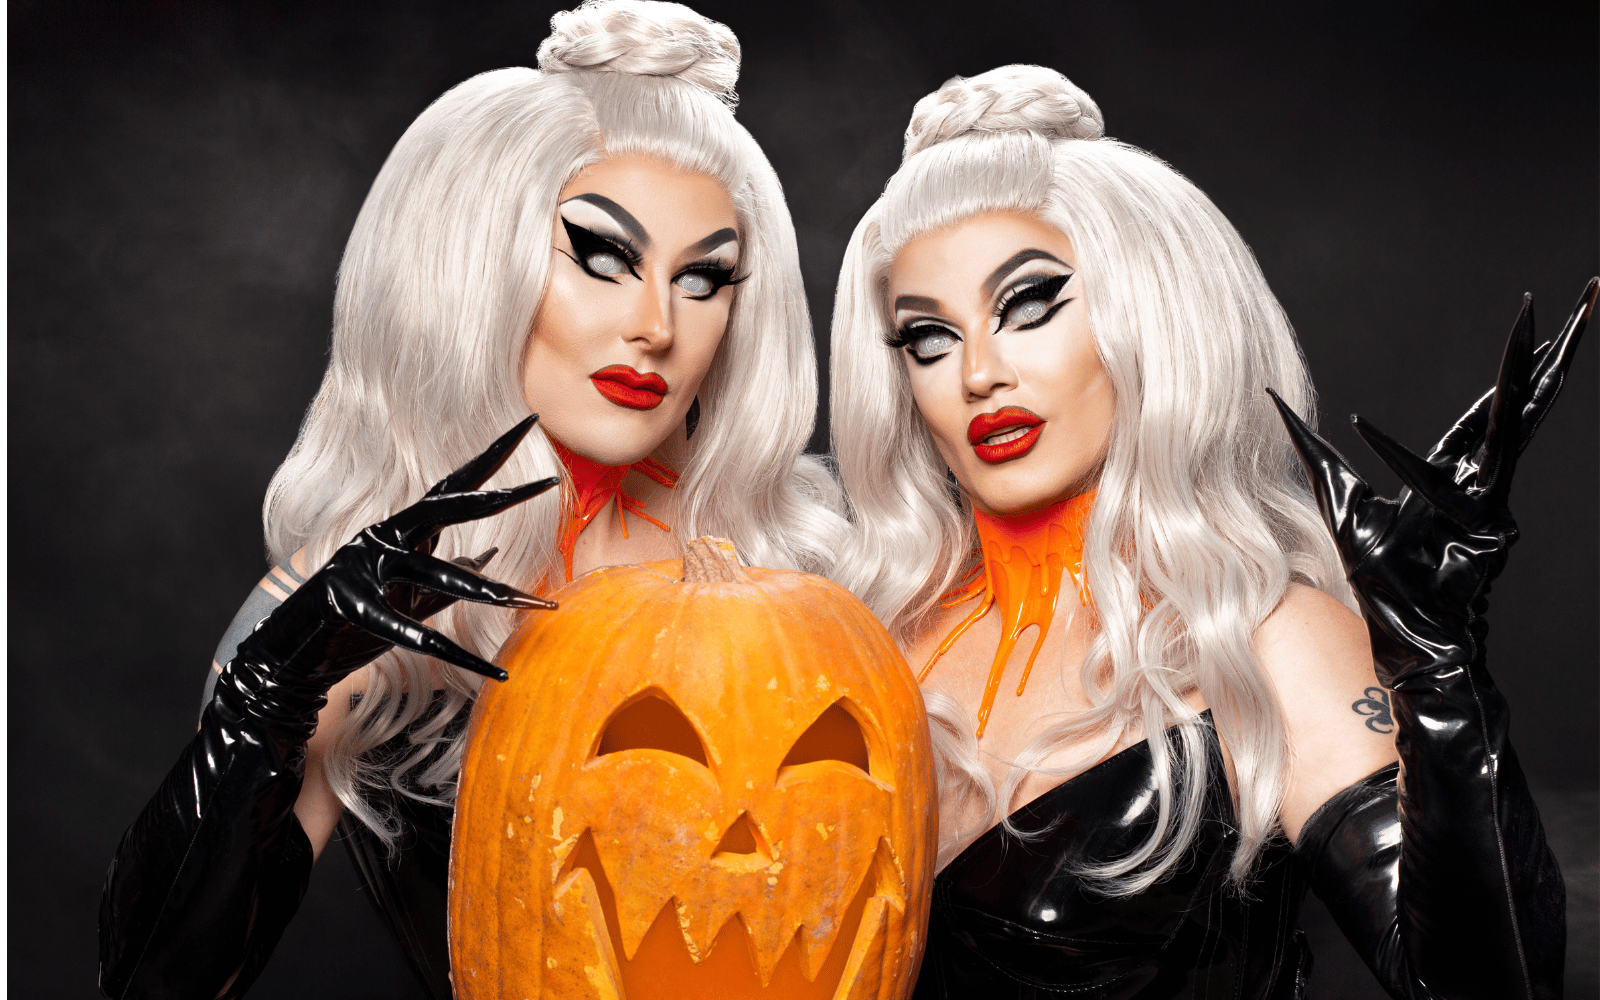 A Dragula photoshoot with the Boulet Brothers